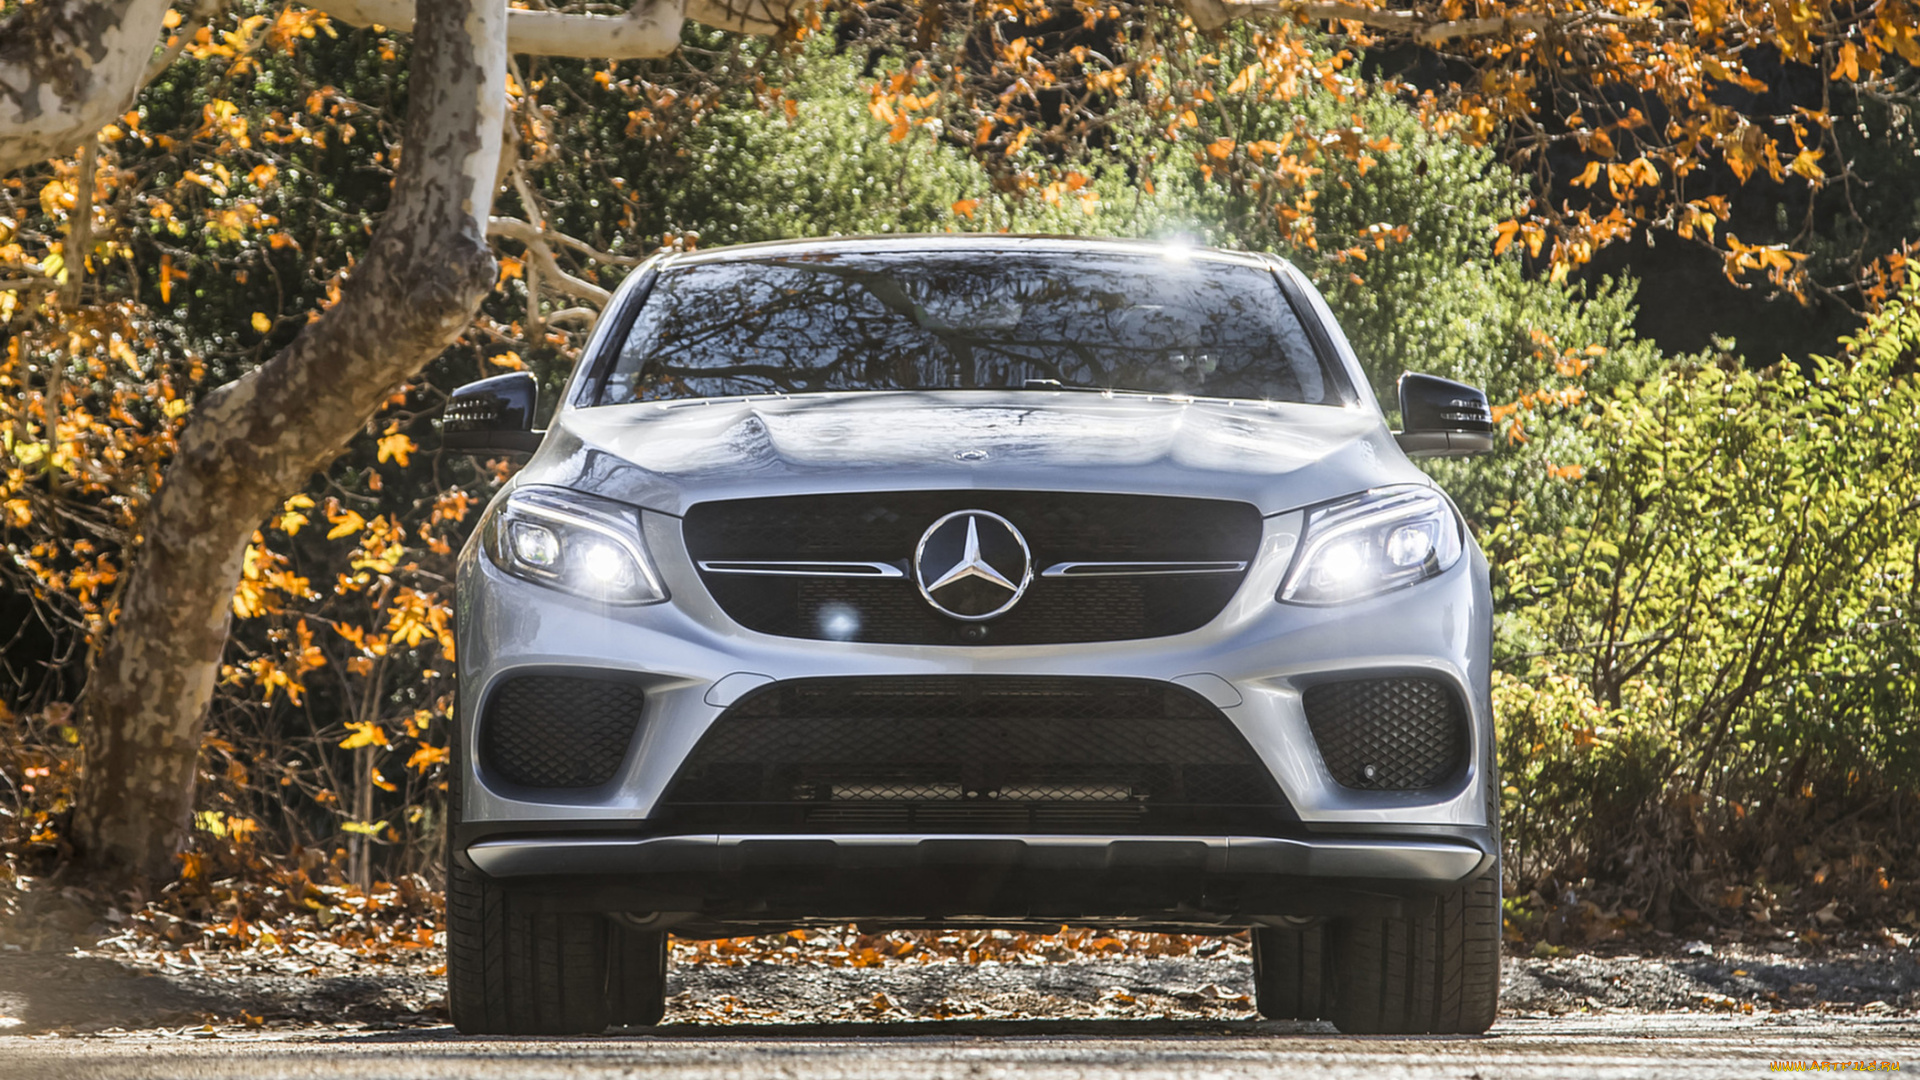 mercedes-benz, amg, gle-43, coupe, 2017, автомобили, mercedes-benz, amg, gle-43, coupe, 2017